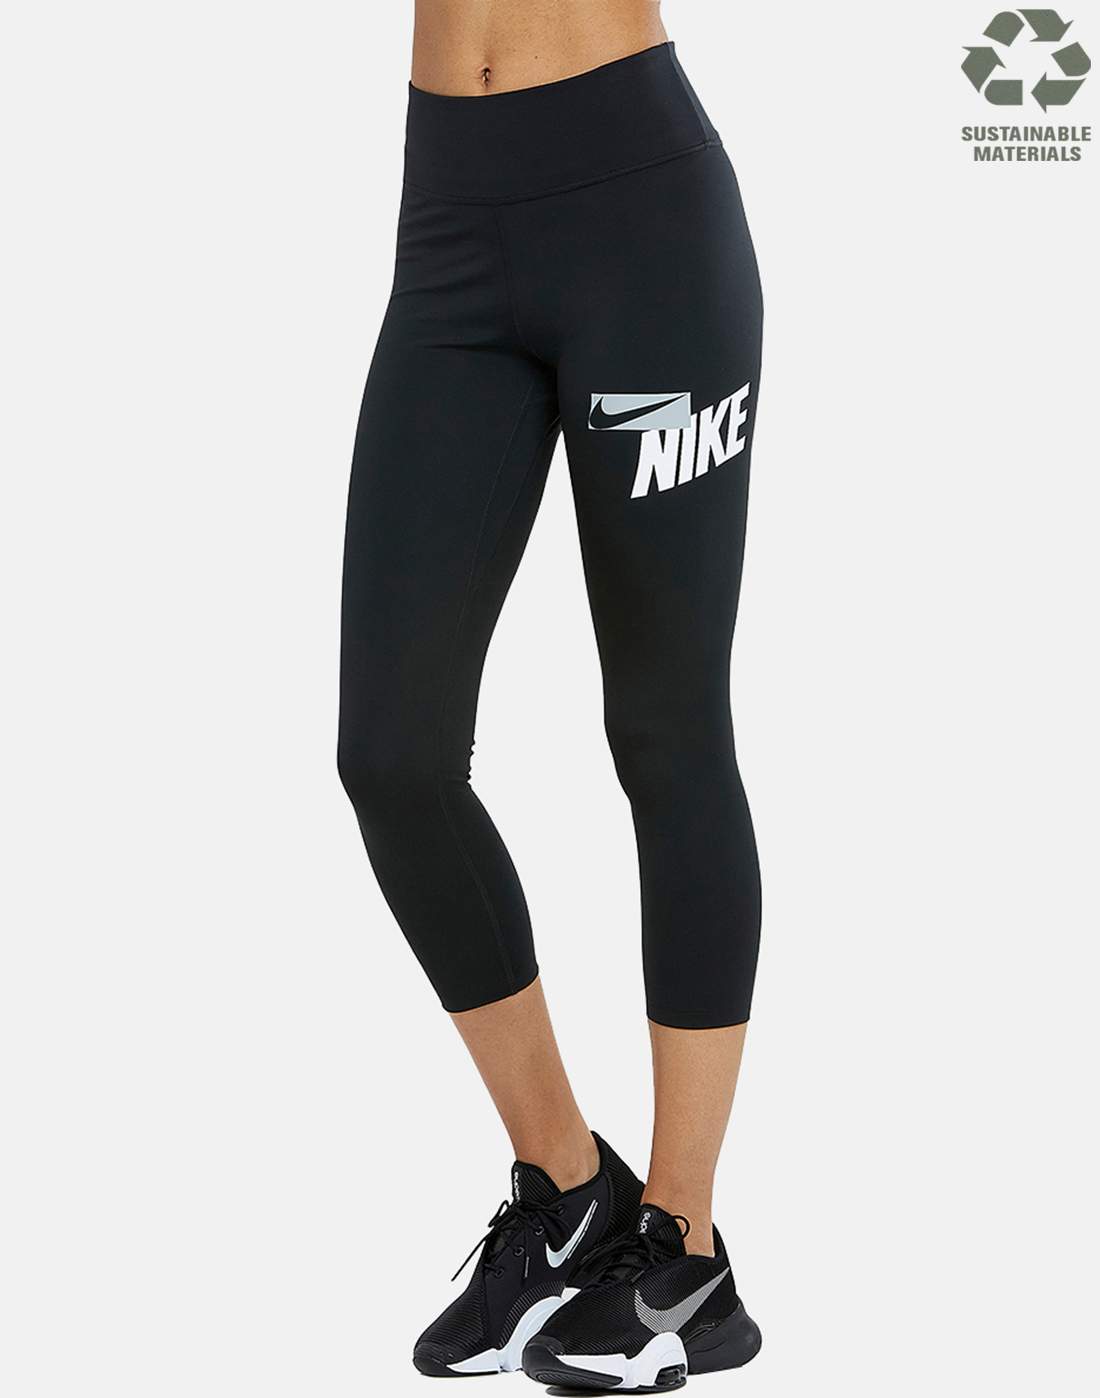 Nike Training One Sculpt Tight Cropped Leggings In Gray, 55% OFF